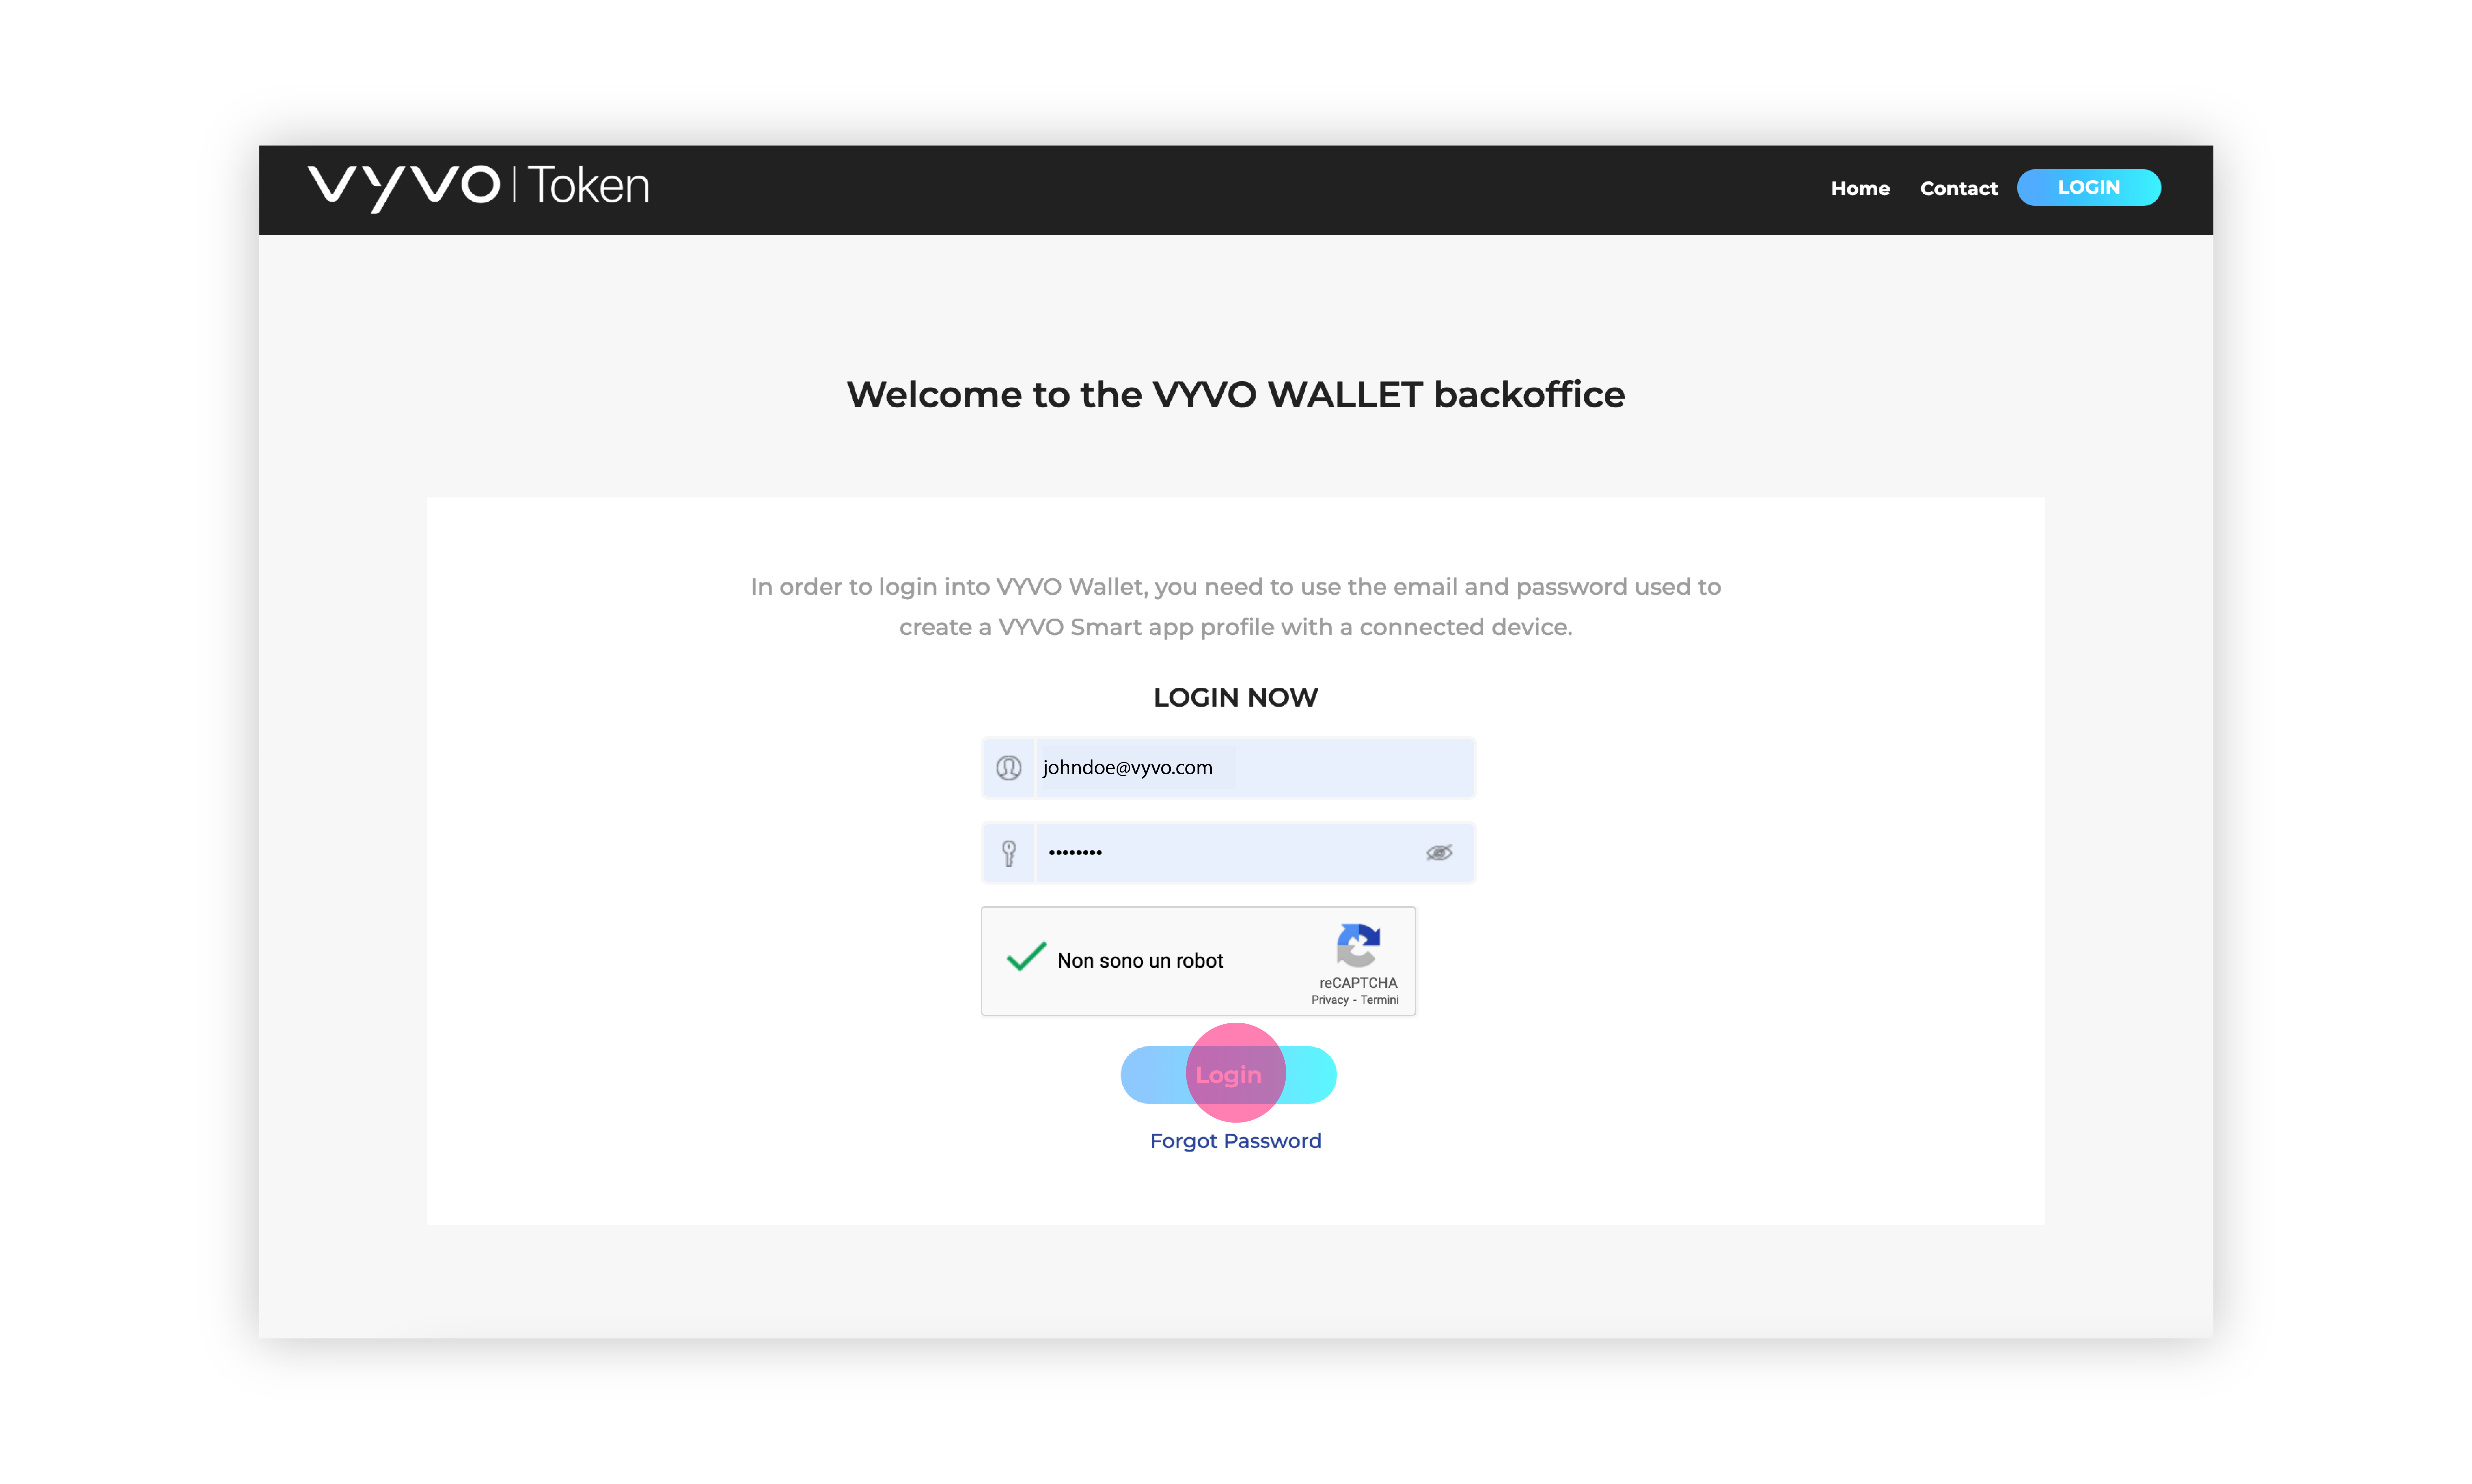 log_in_VyvoWallet_with_TFA_1_Tavola_disegno_1.png